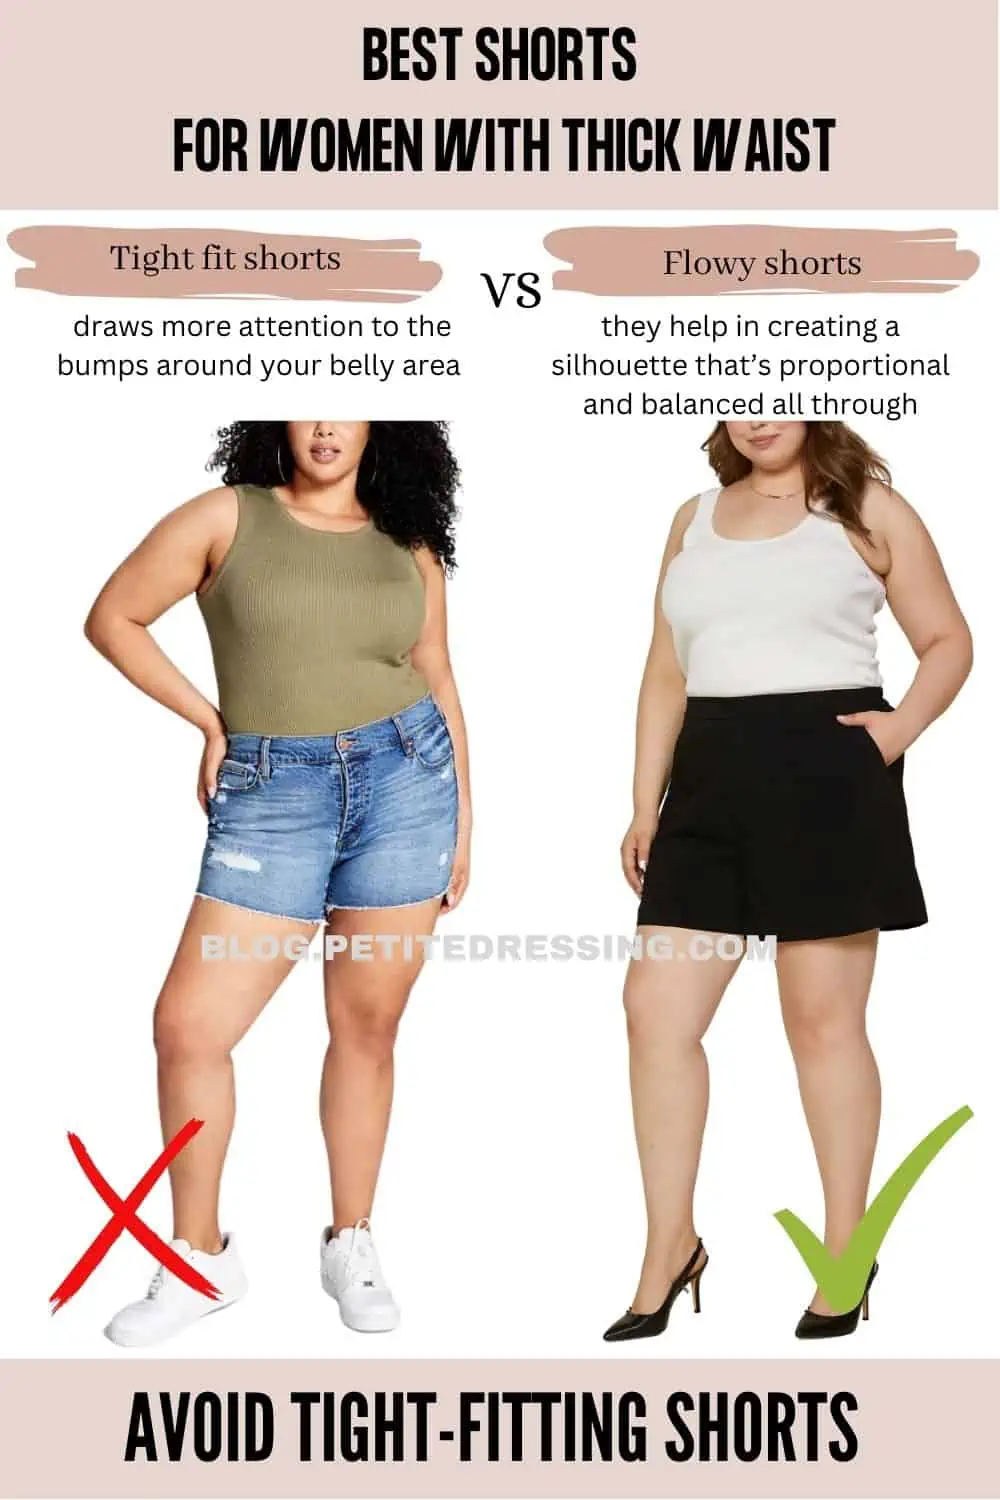 The Shorts Guide for Women with Thick Waist - Petite Dressing